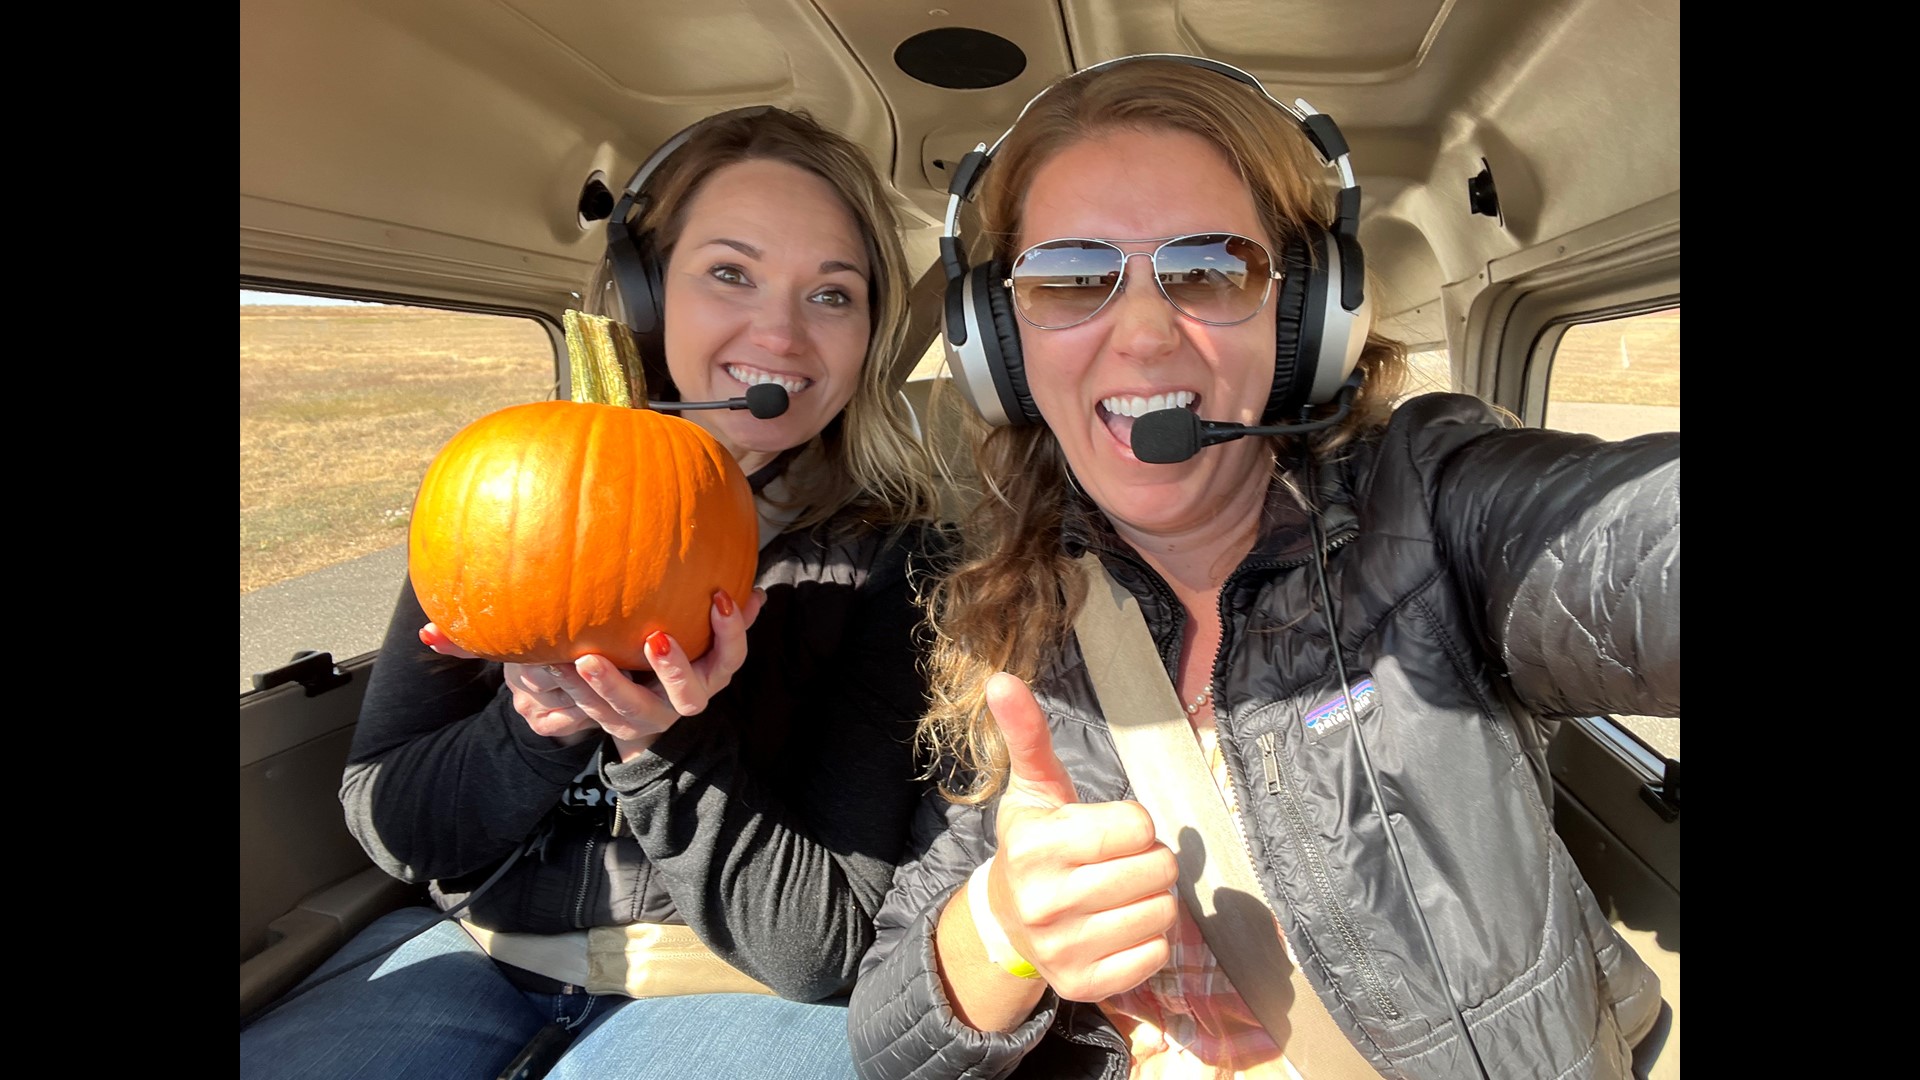 World Pilot's Day is April 26th! The Blonde Bombers will be giving Tower Tours at FlyteCO that day. Learn more and get tickets at BlondeBombers.com.